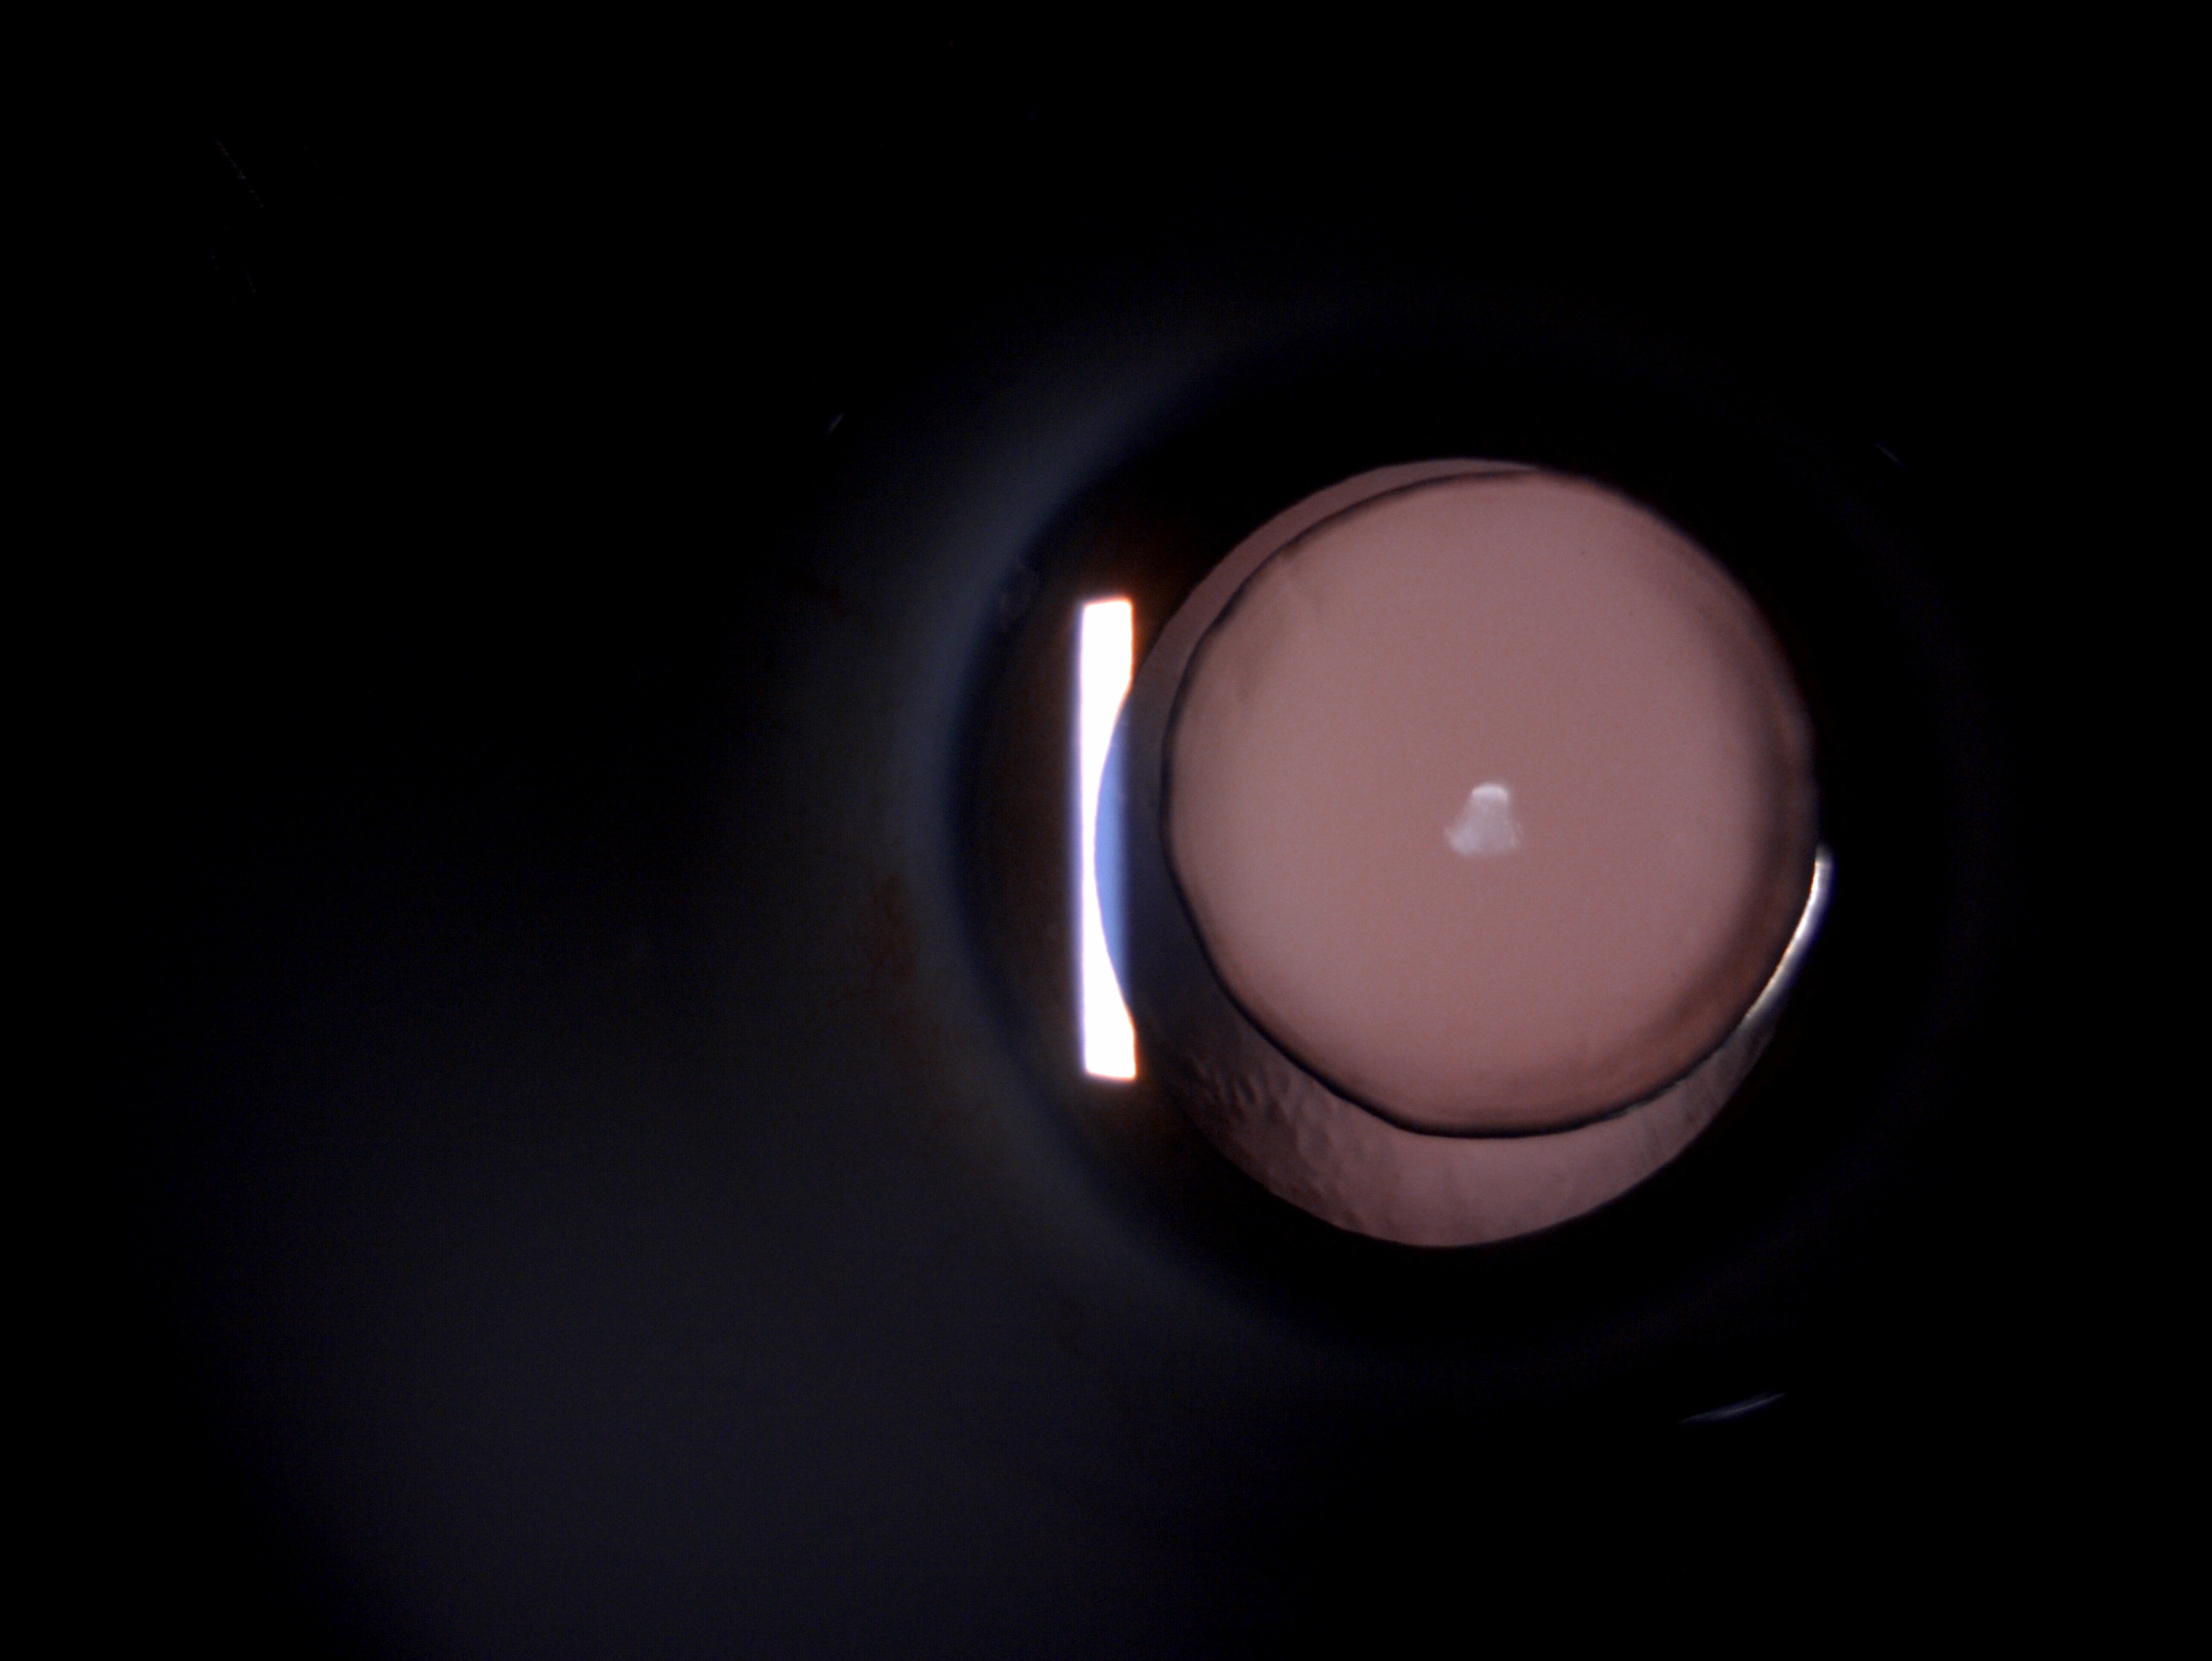 Slit lamp image of the patient depicting microspherophakic lens with ectopia lentis in a patient with Weill-Marchesani syndrome. The 360 degree deficiency of zonules can be easily made out.